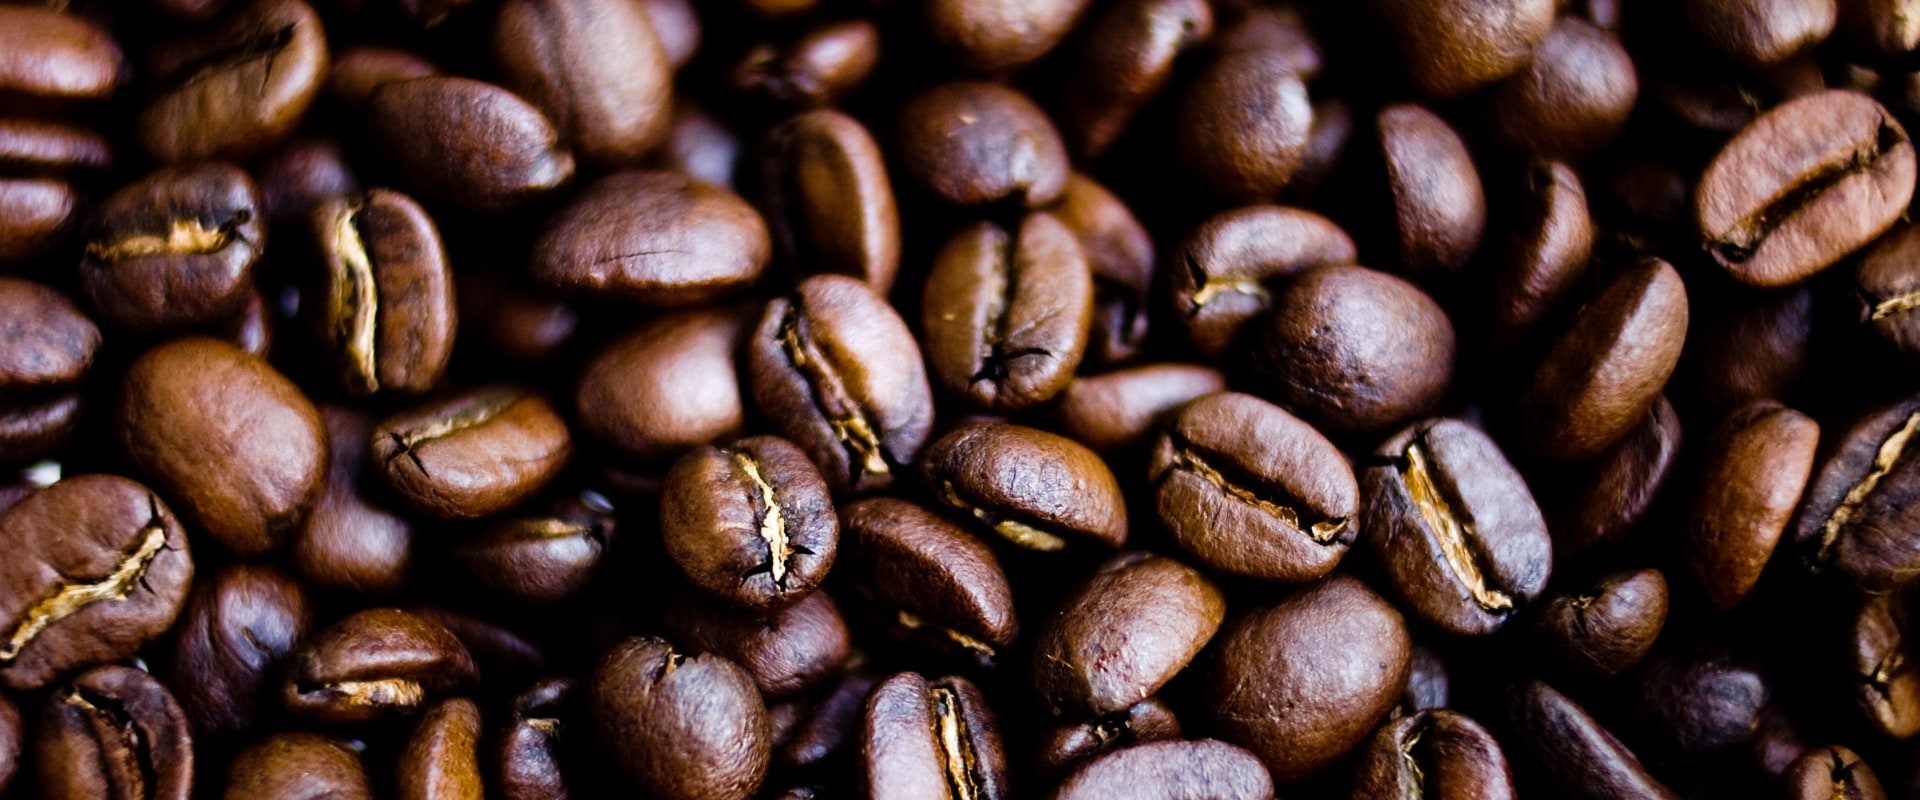 The Best Way to Store Coffee for Maximum Freshness and Flavor